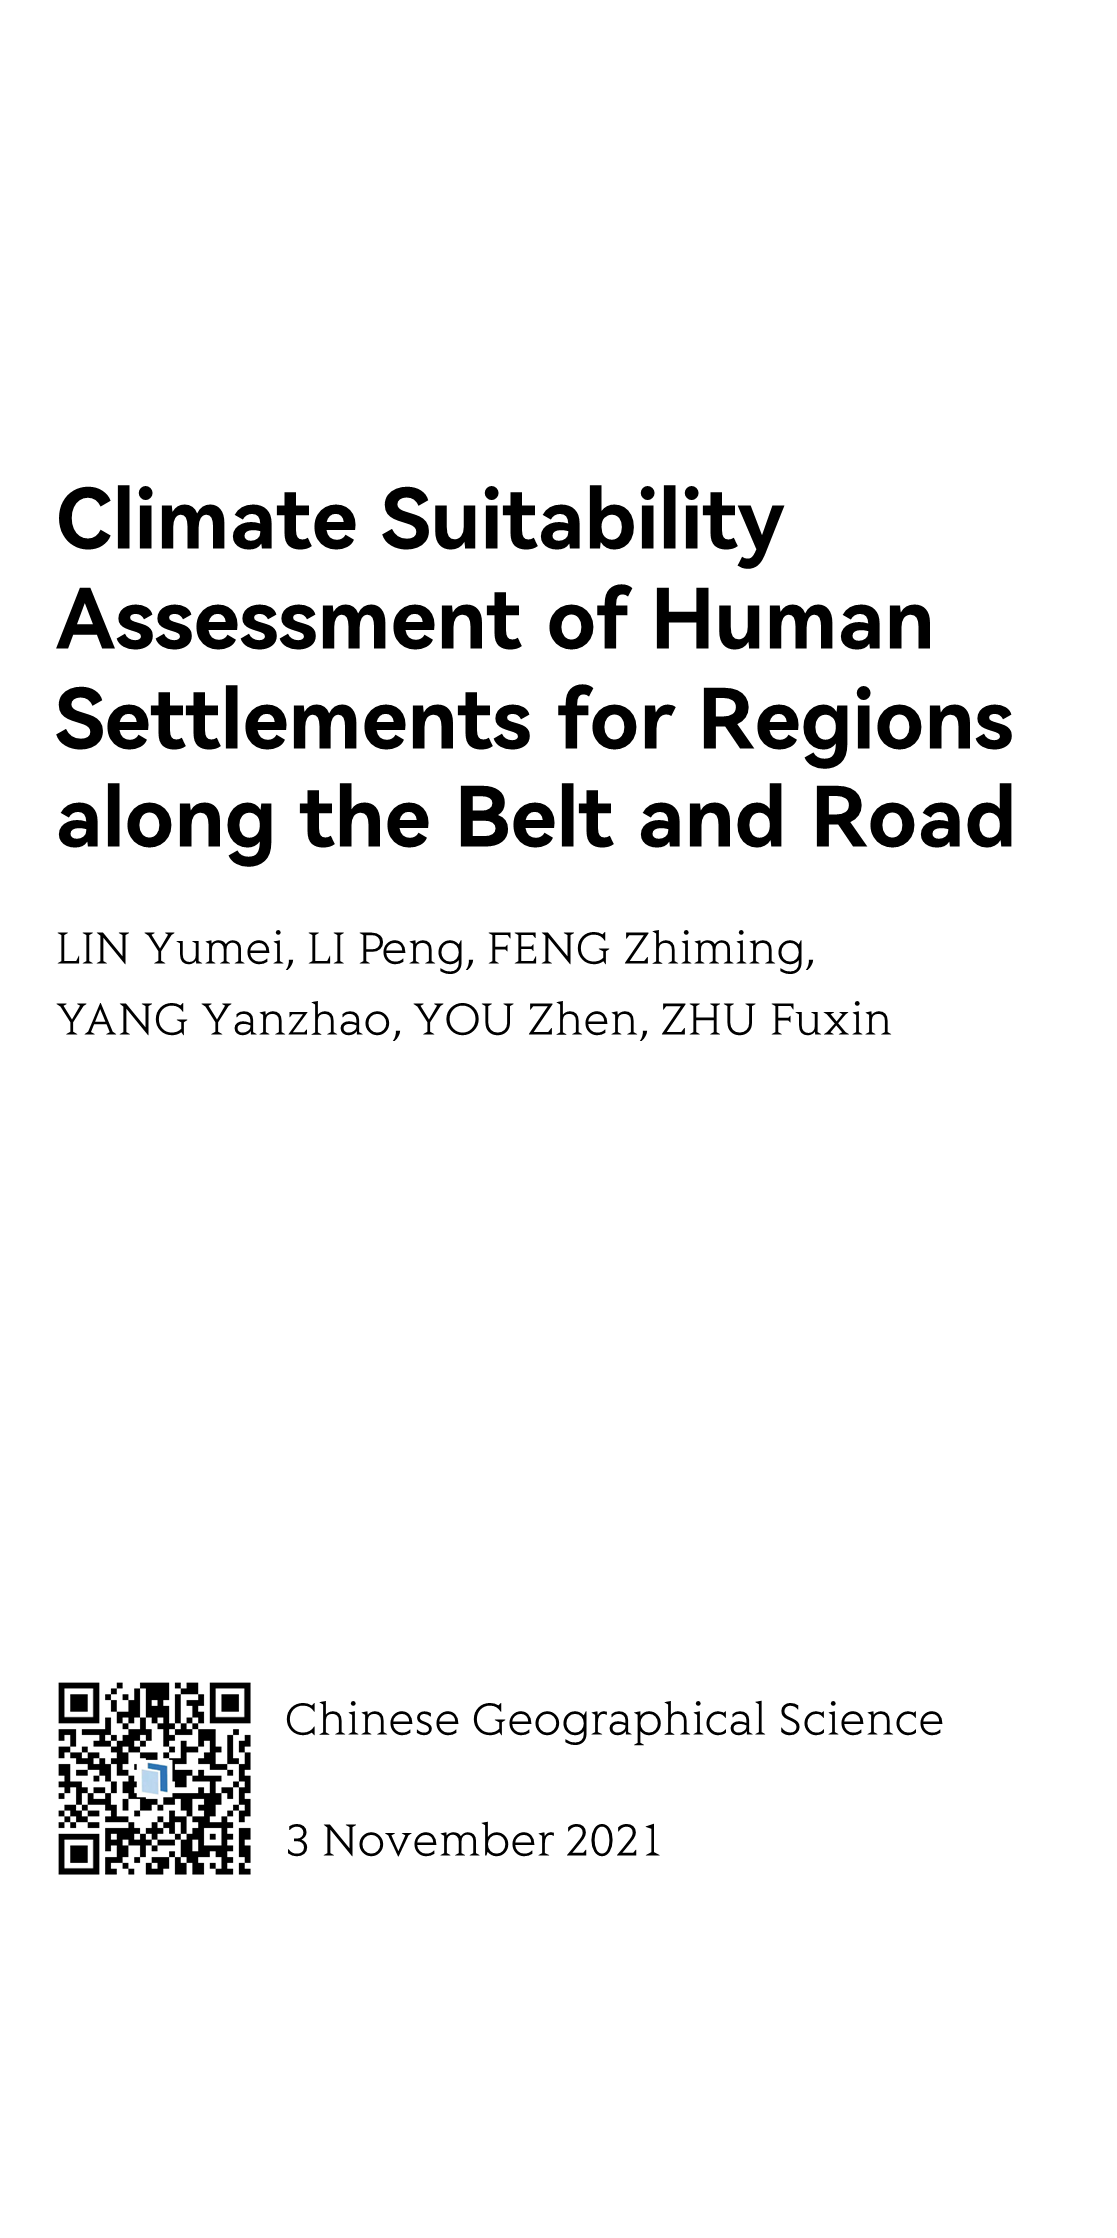 Climate Suitability Assessment of Human Settlements for Regions along the Belt and Road_1